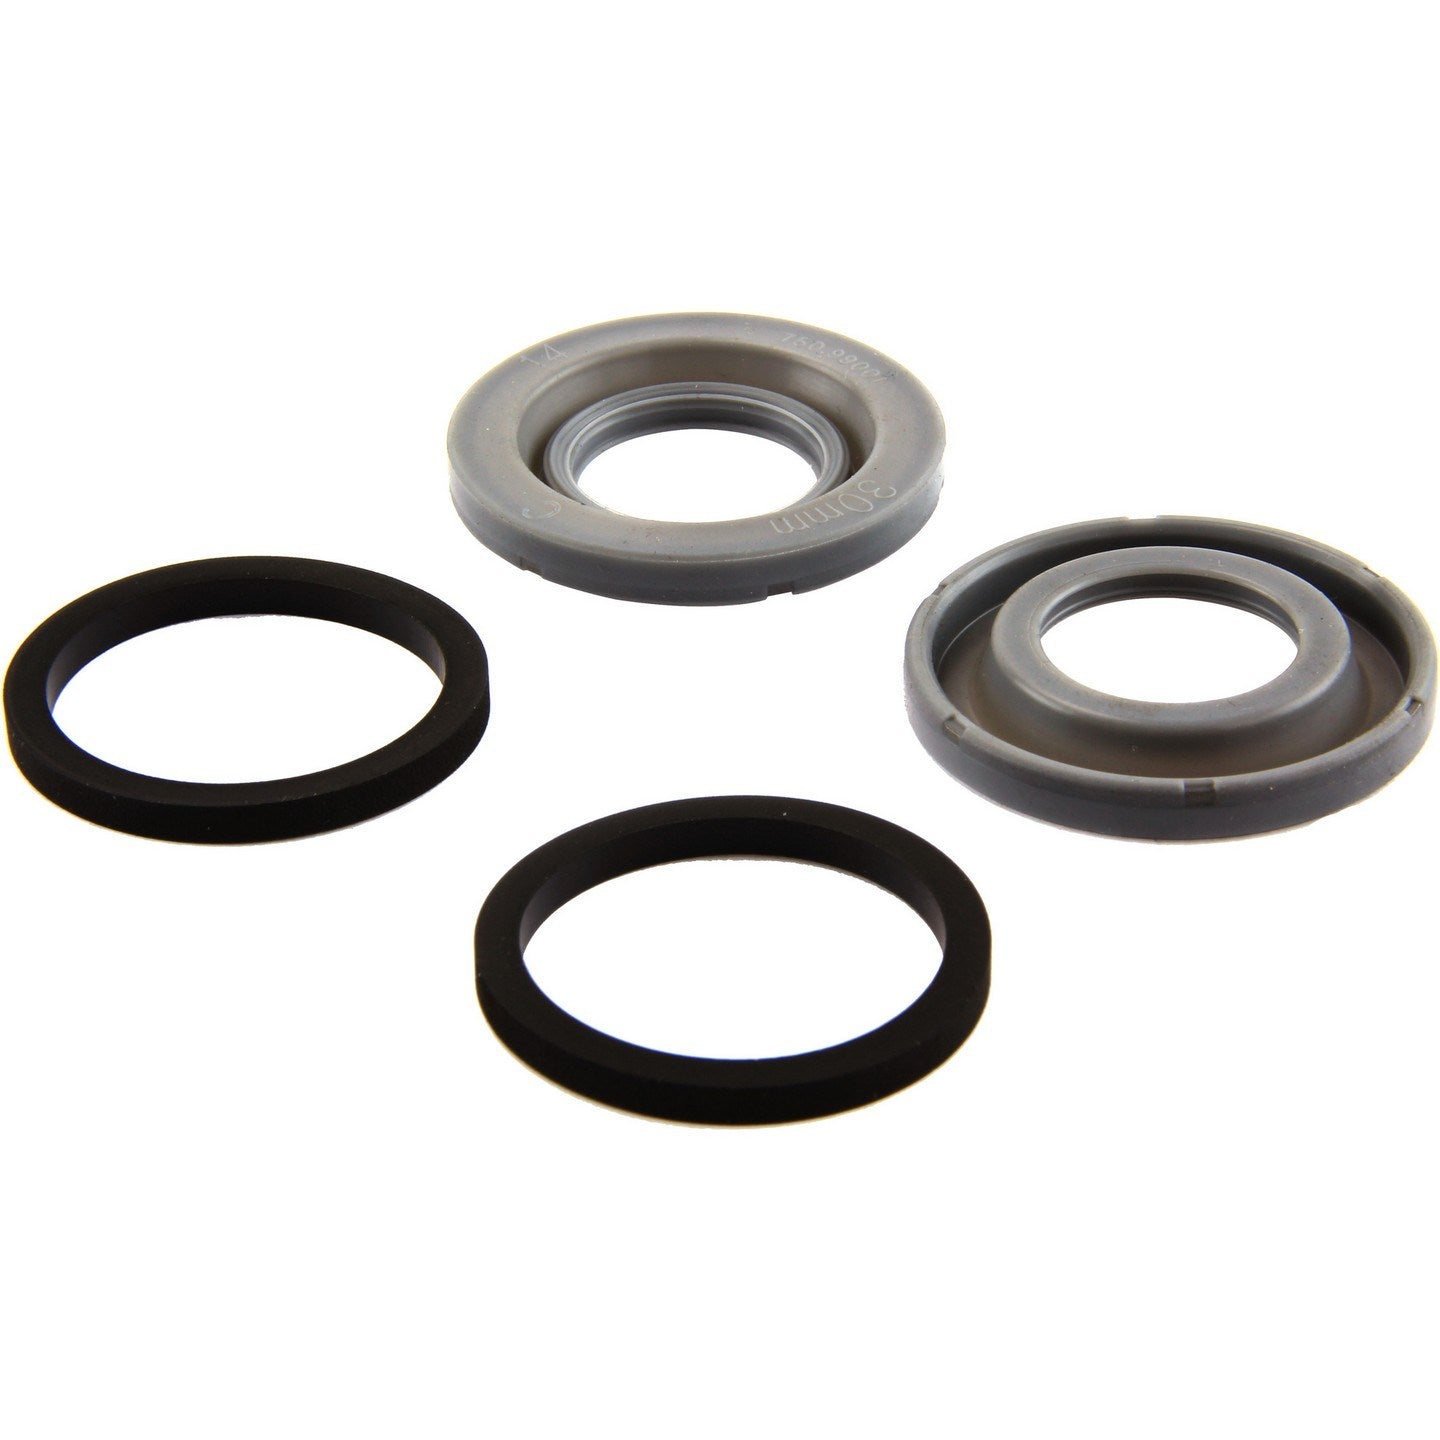 Stoptech BBK 30mm ST-Caliper Pressure Seals & Dust Boots Includes Components to Rebuild ONE Pair 143.99030